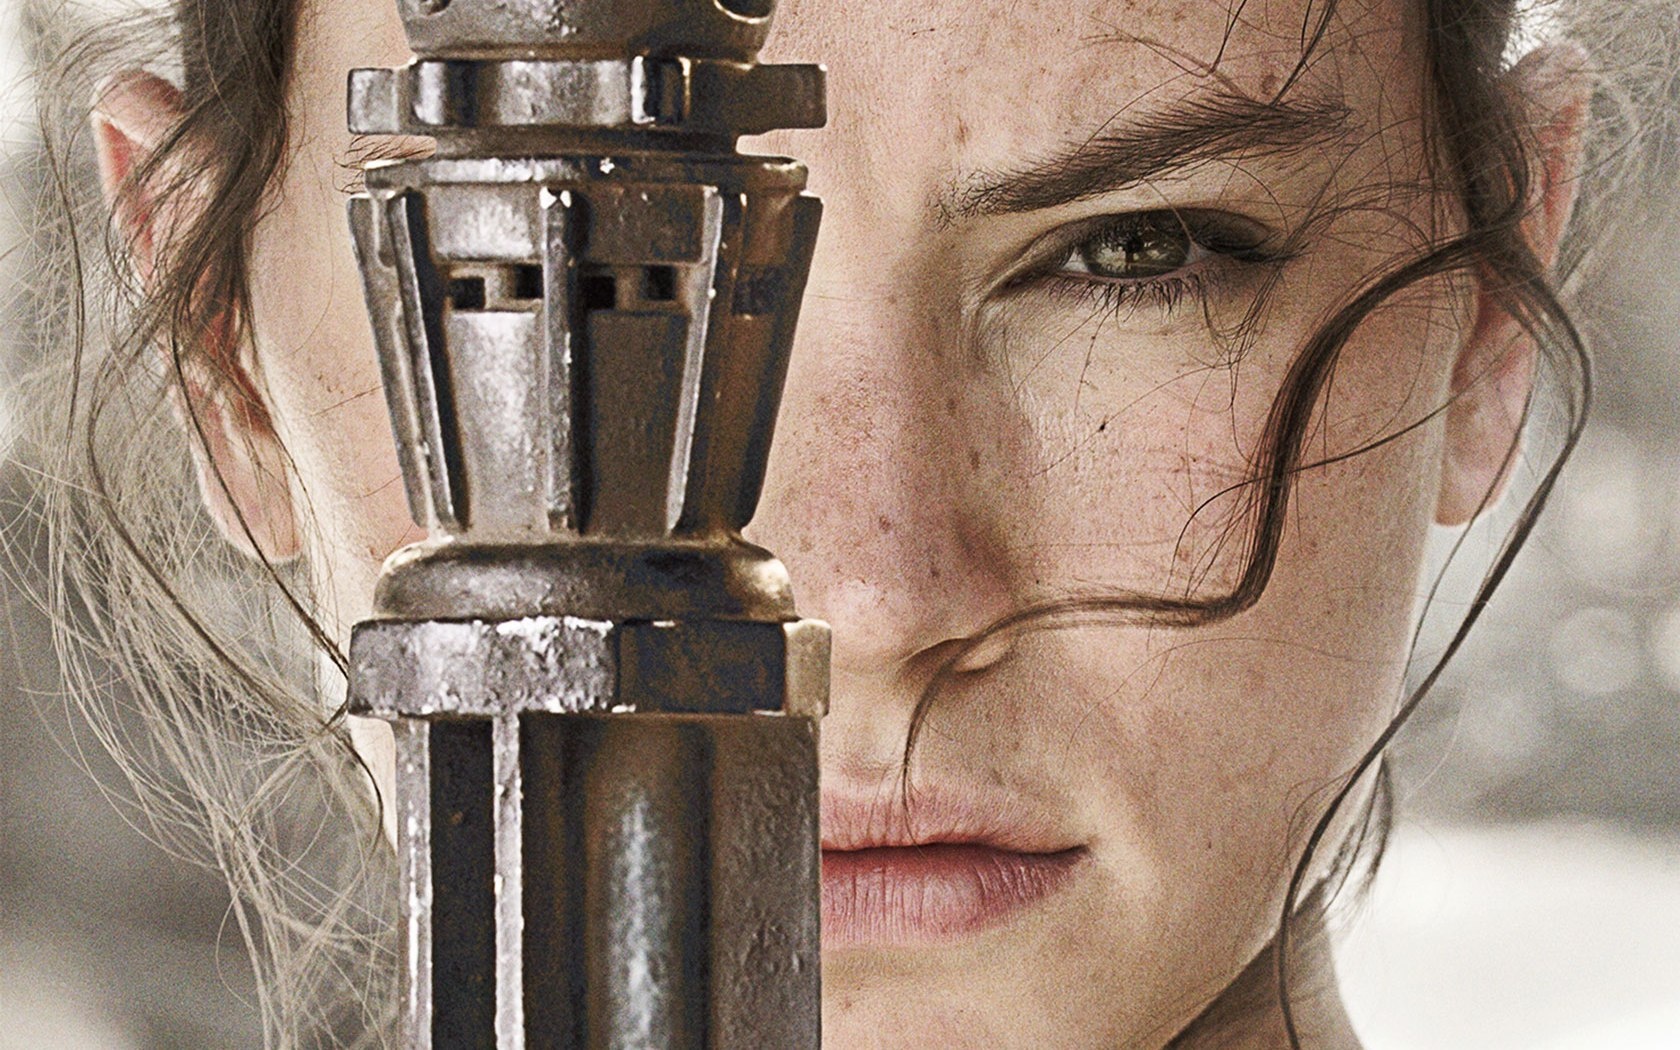 Daisy Ridley As Rey Star Wars The Force Awakens Wallpaper